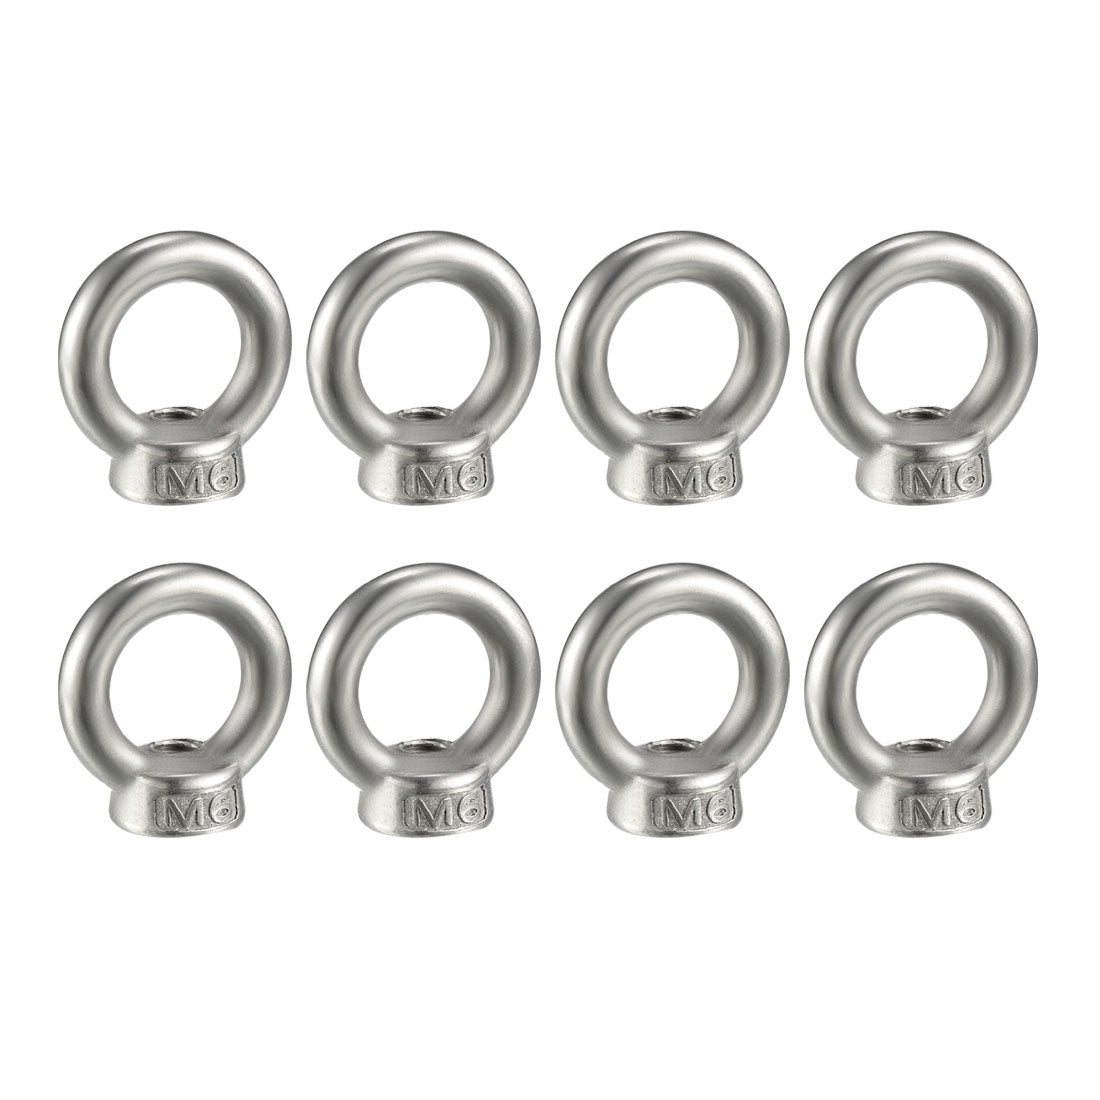 uxcell Uxcell M6 Female Thread 304 Stainless Steel Lifting Eye Nuts Ring 8pcs